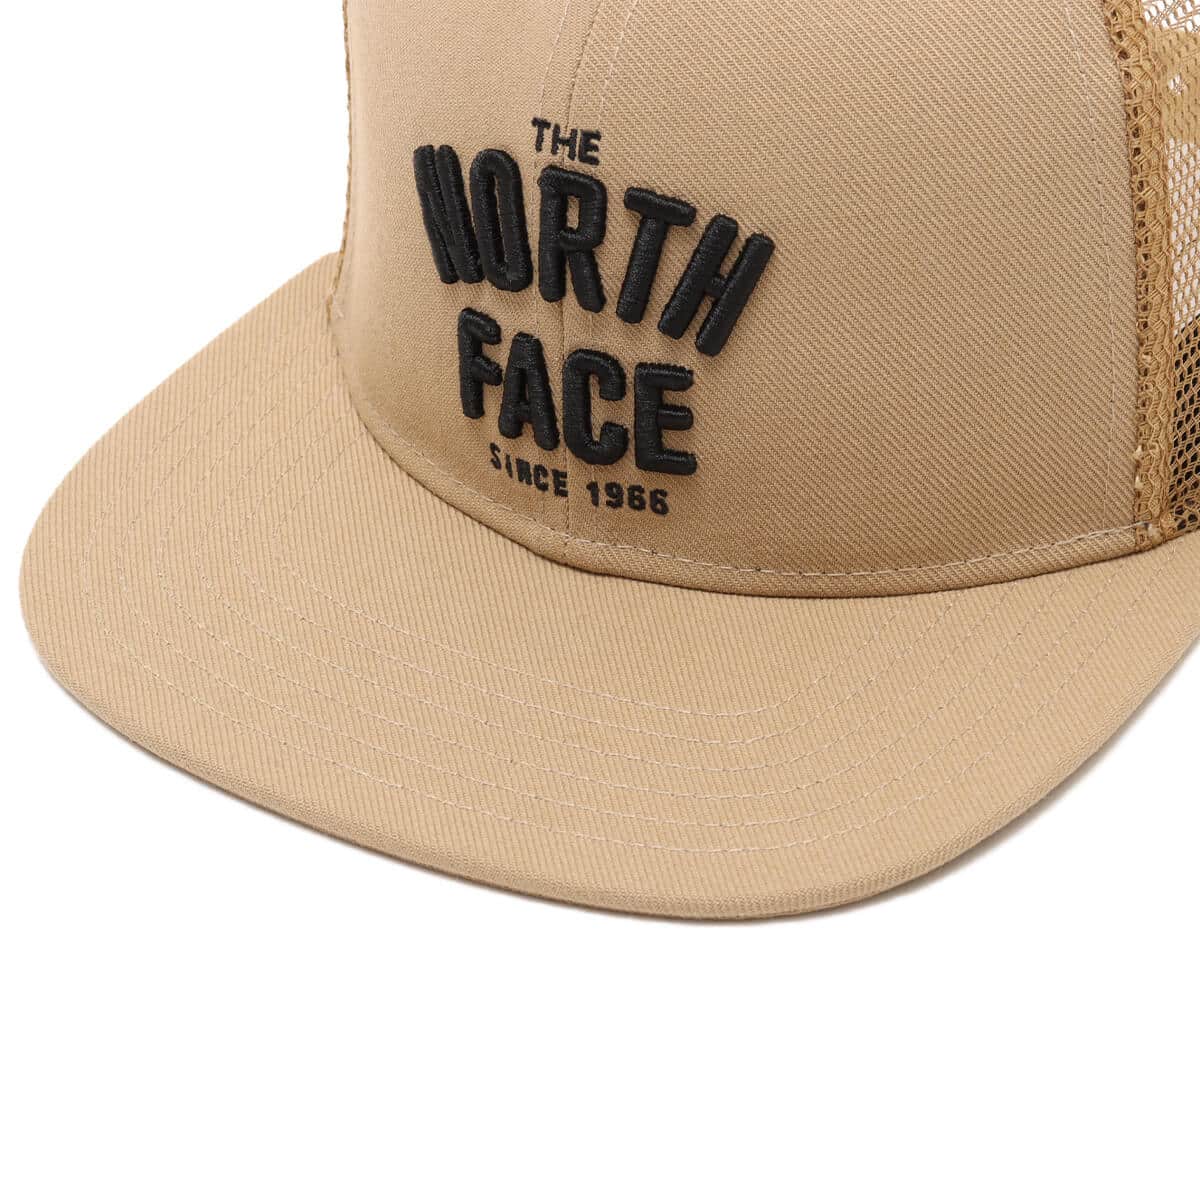 THE NORTH FACE Message Mesh Cap ケルプタン 24SS-I